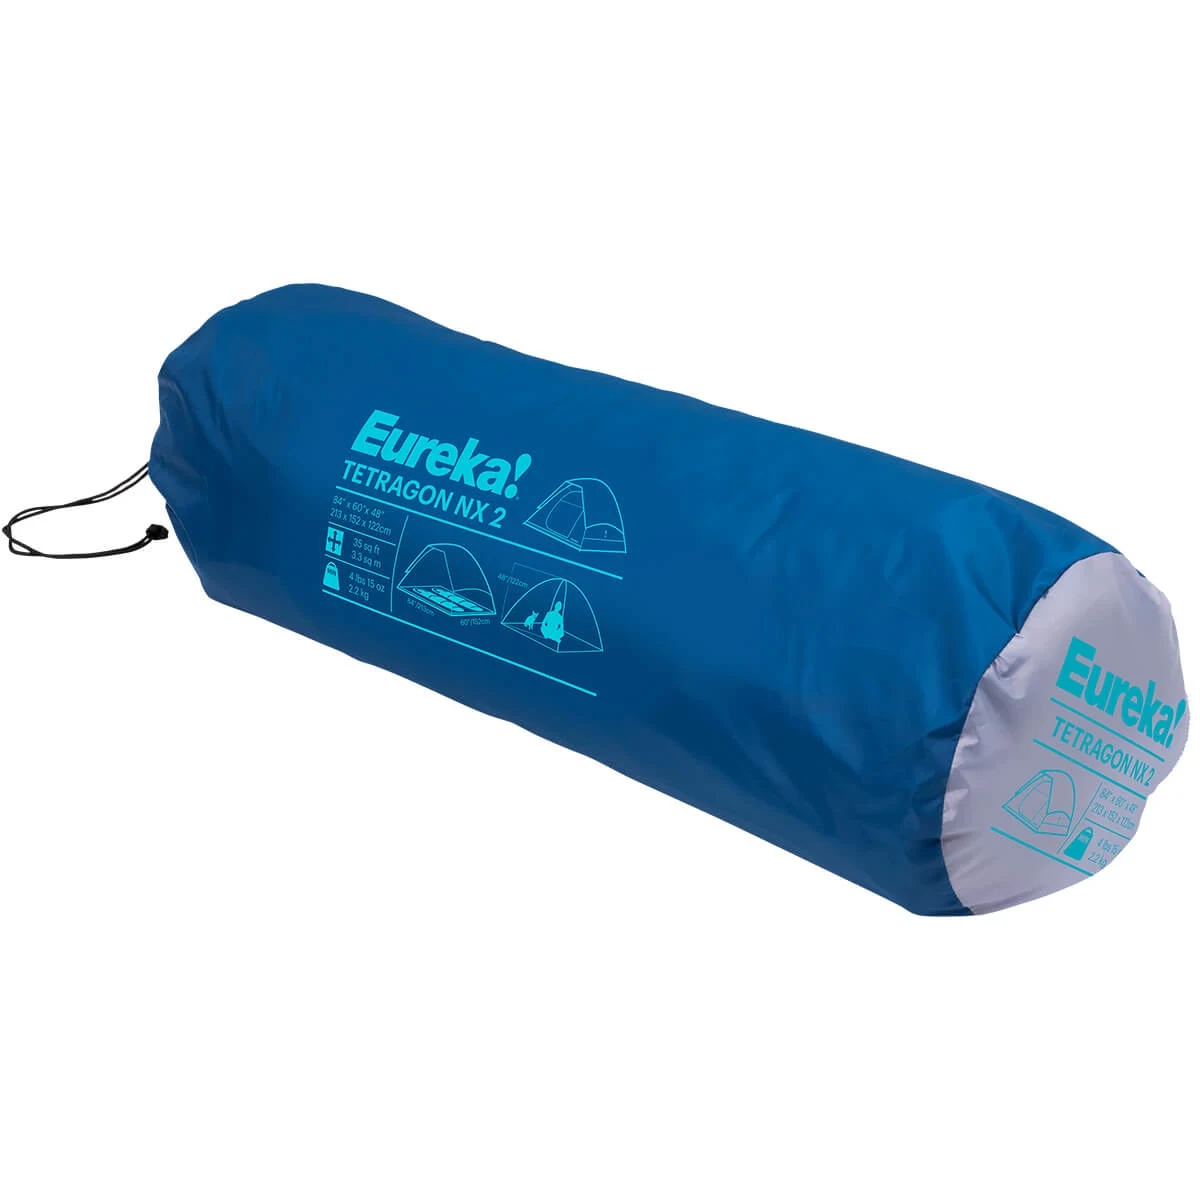 Packed Tetragon NX 2 tent in carry bag